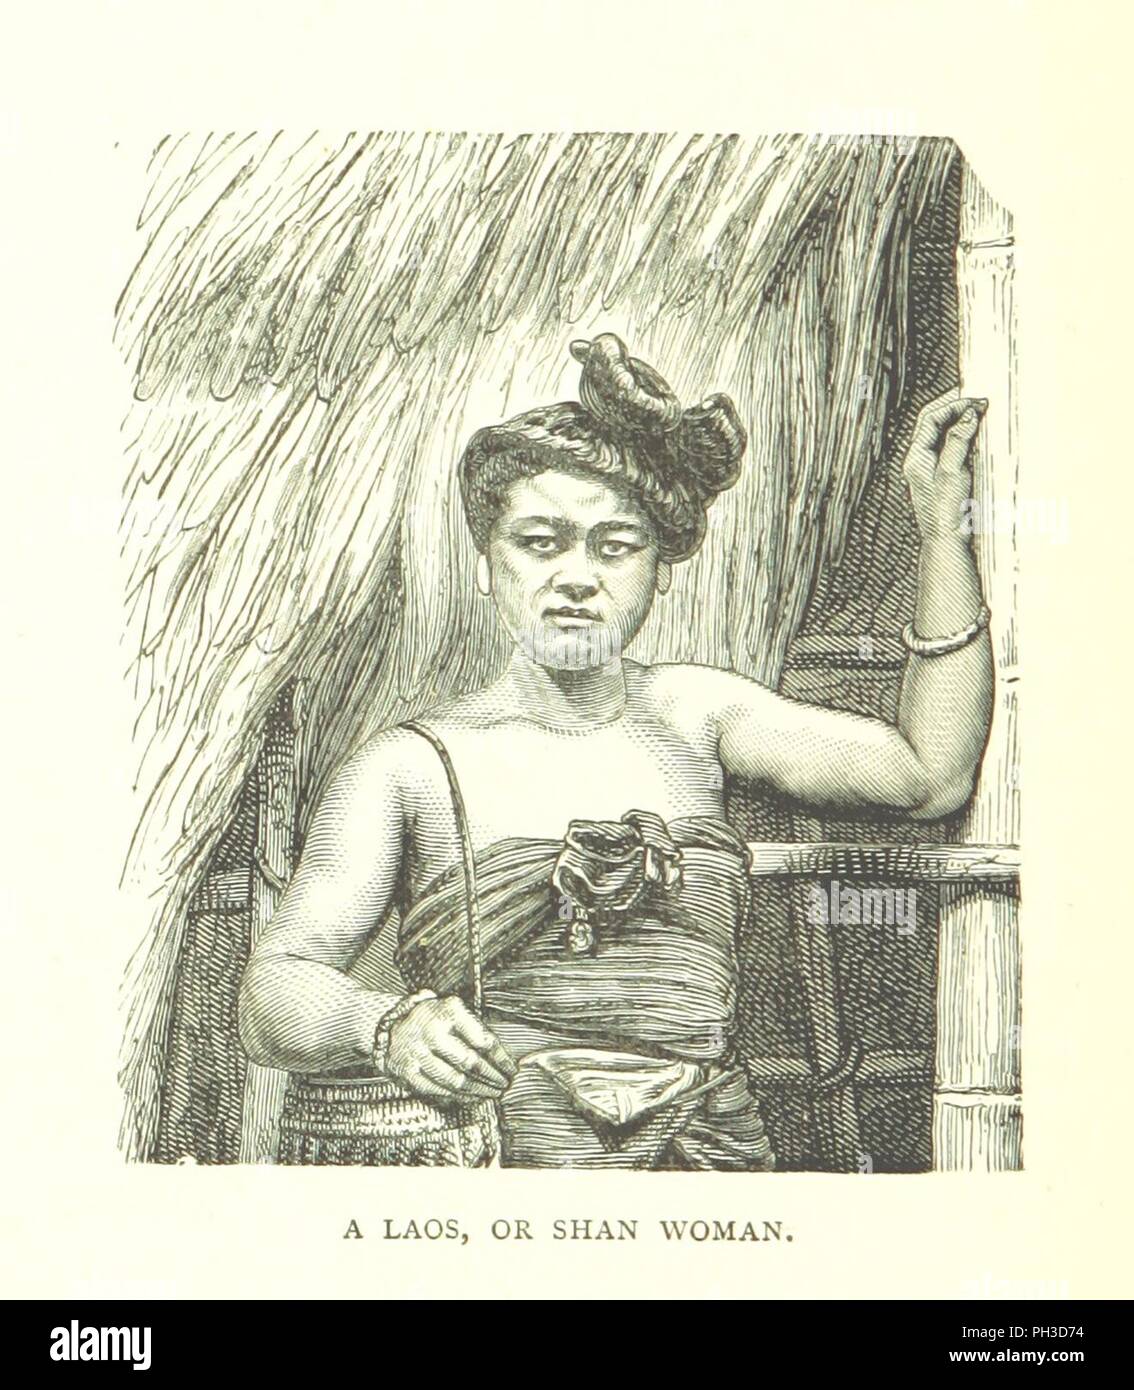 Image  from page 240 of 'Amongst the Shans . With . illustrations, and an historical sketch of the Shans by Holt S. Hallett . Preceded by an introduction on the cradle of the Shan race by Terrien de Lacouperie' by The B0018. Stock Photo